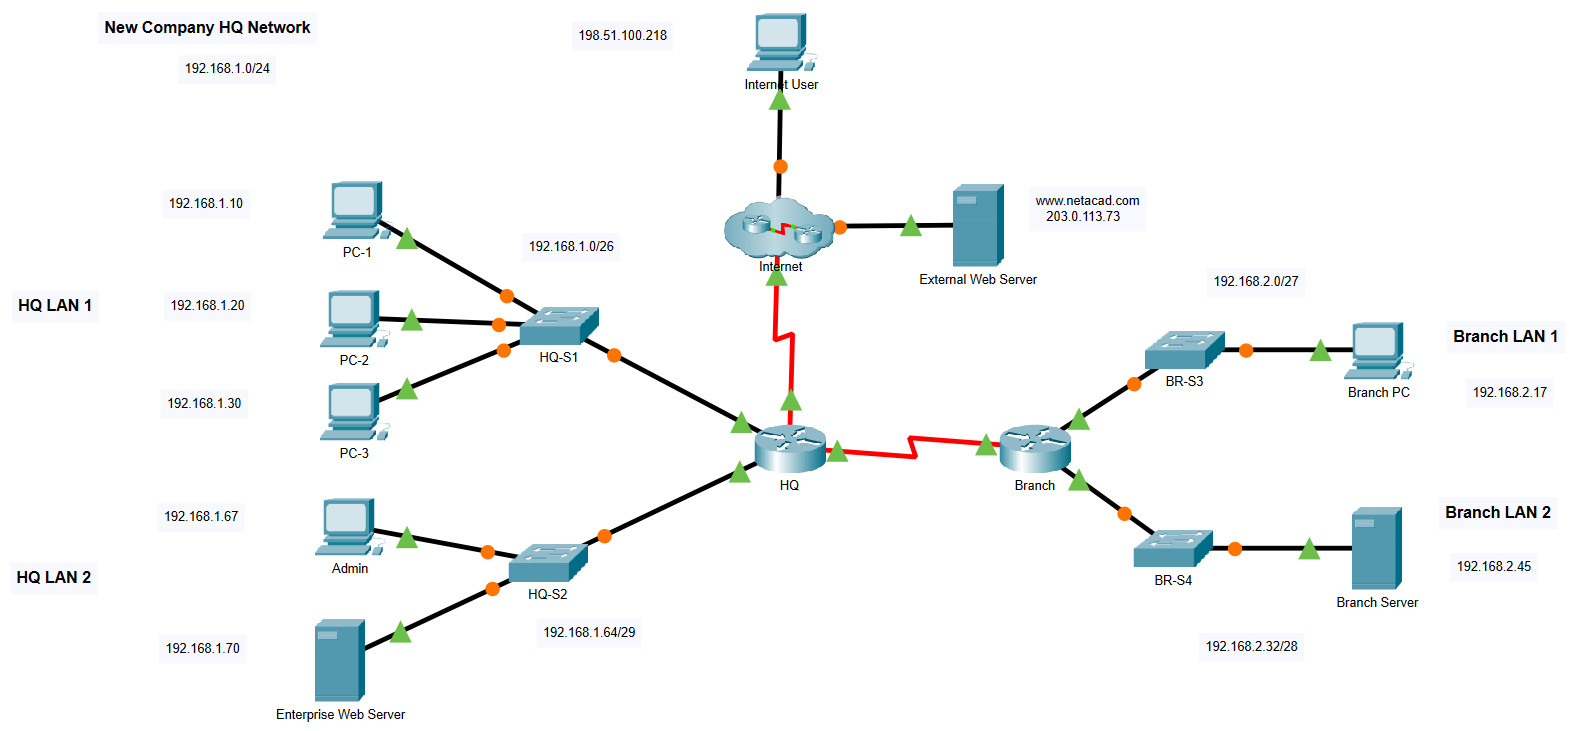 Packet tracer 5.5.1